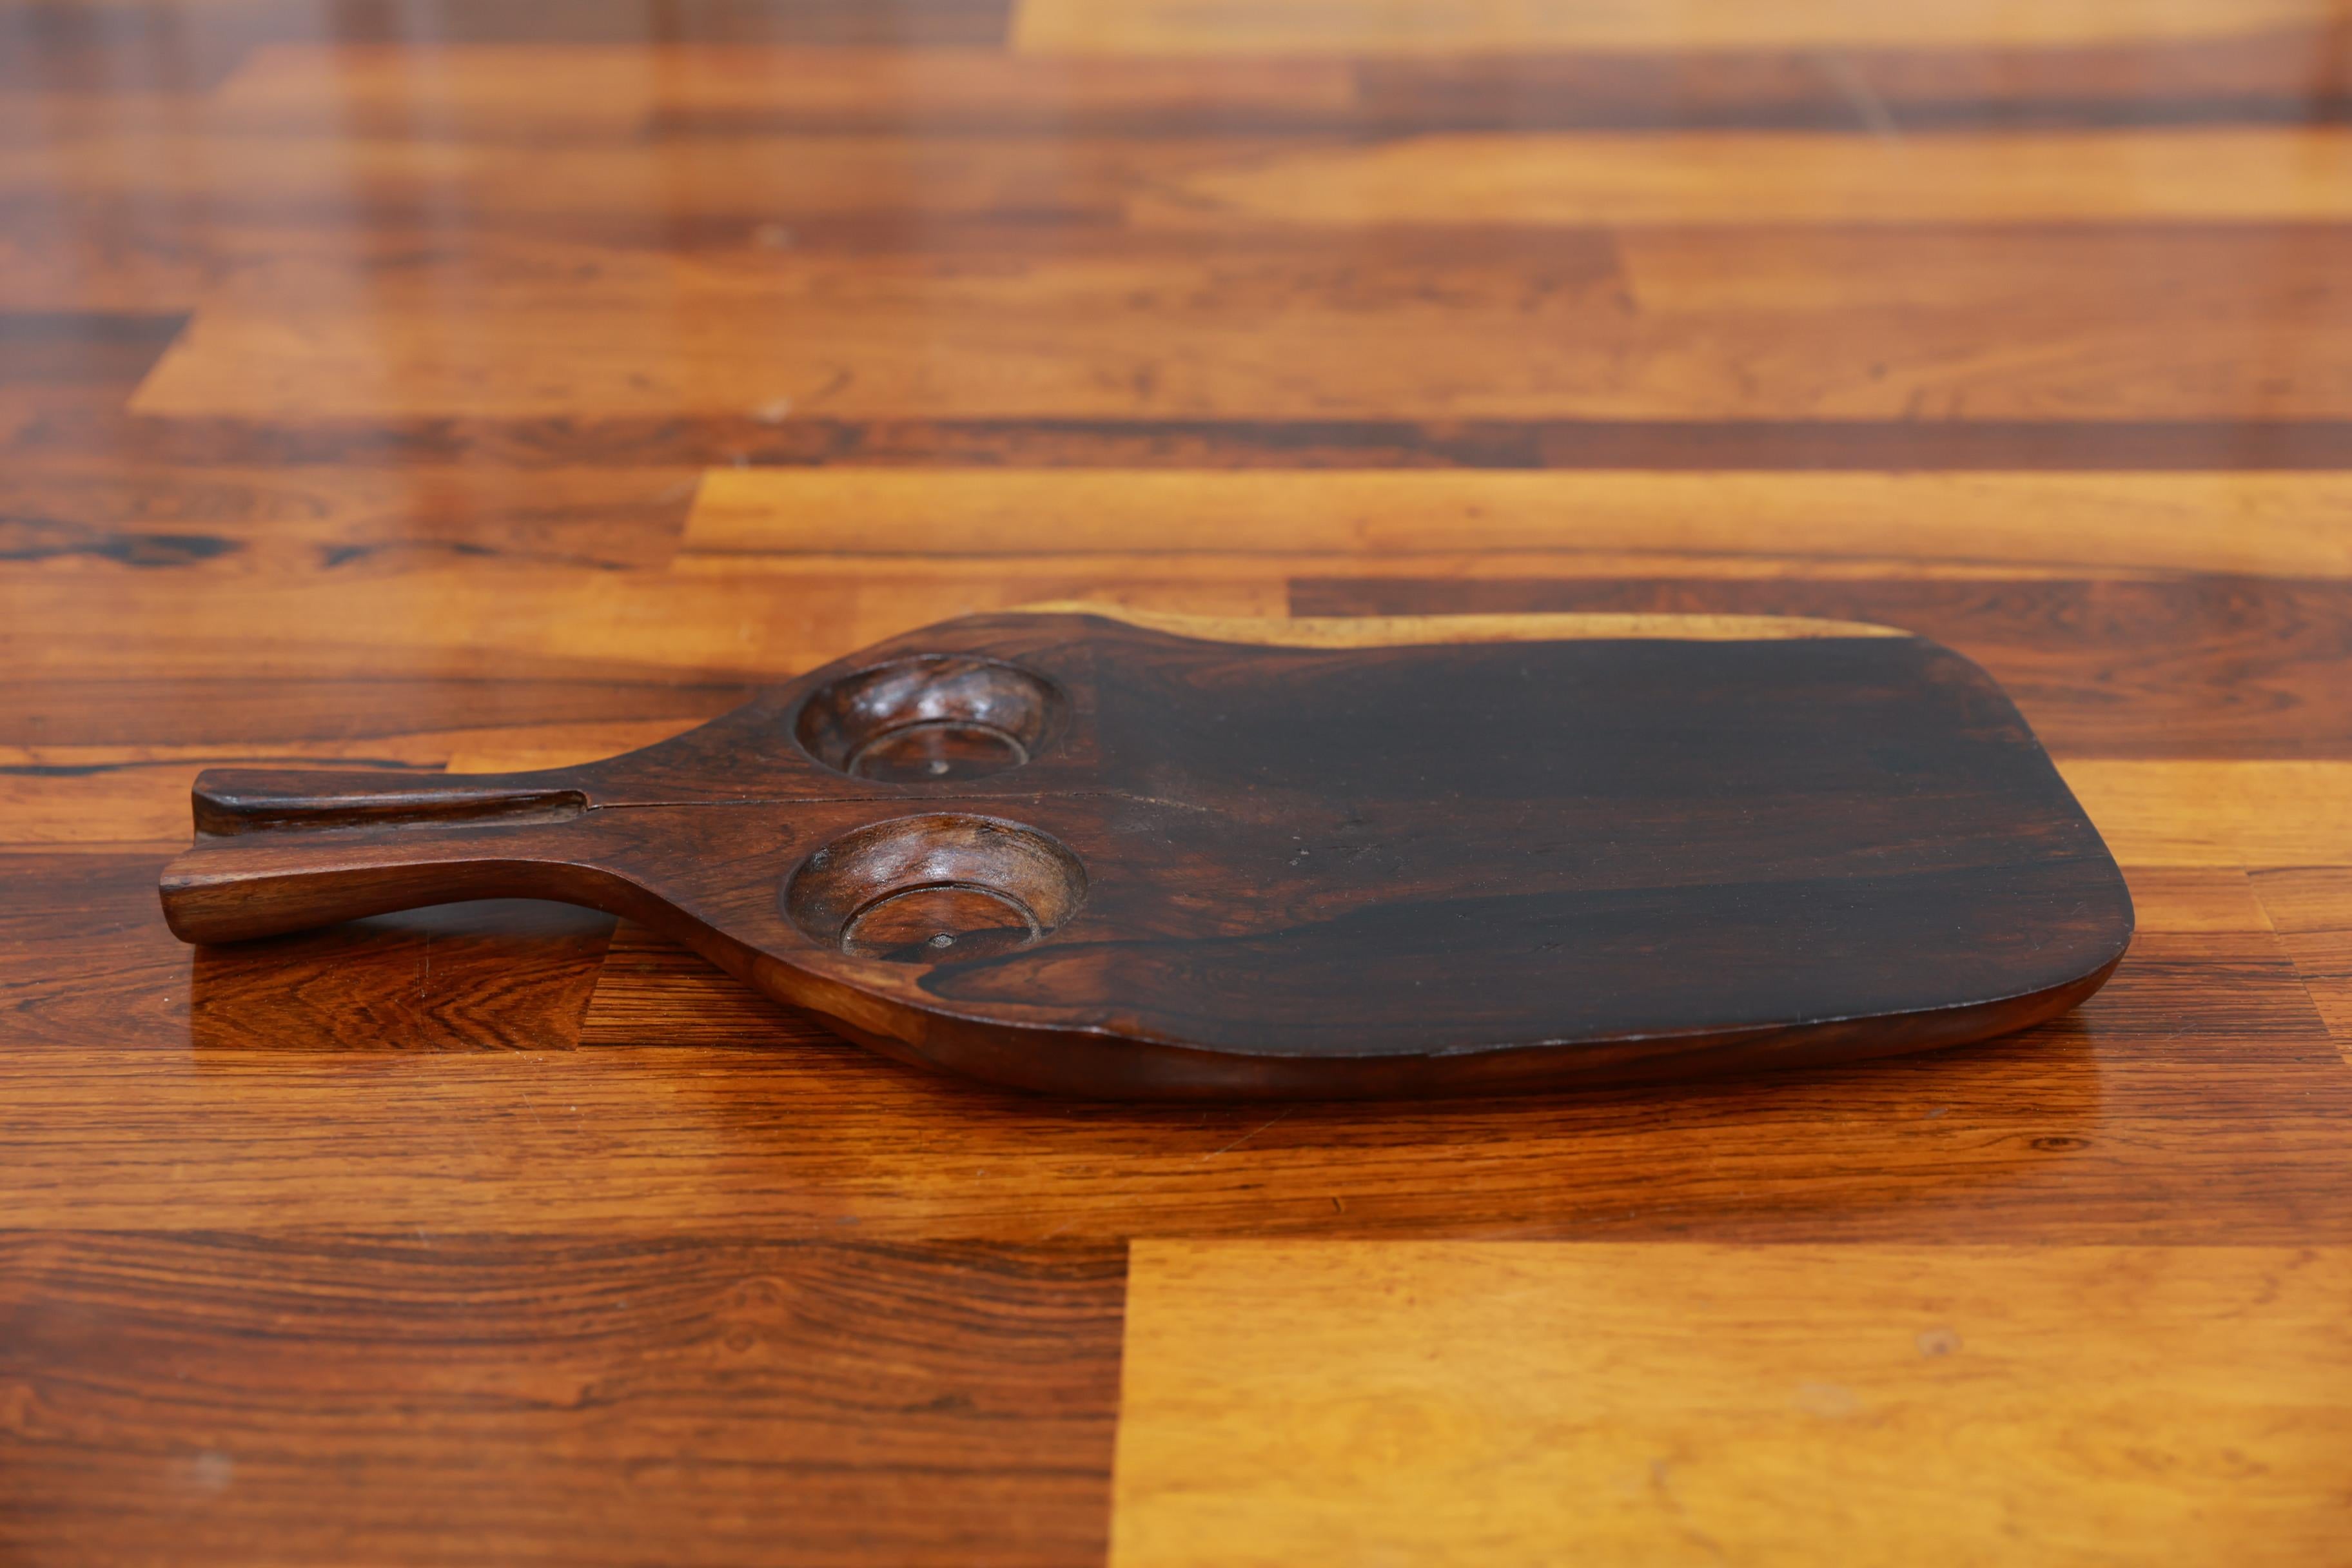 Available today, this Midcentury Brazilian Modern Charcuterie Platter in Hardwood by Jean Gillon, is gorgeous!

Handcrafted from hard rosewood (also known as Jacaranda), this charcuterie platter features clean lines with elegant curves and two